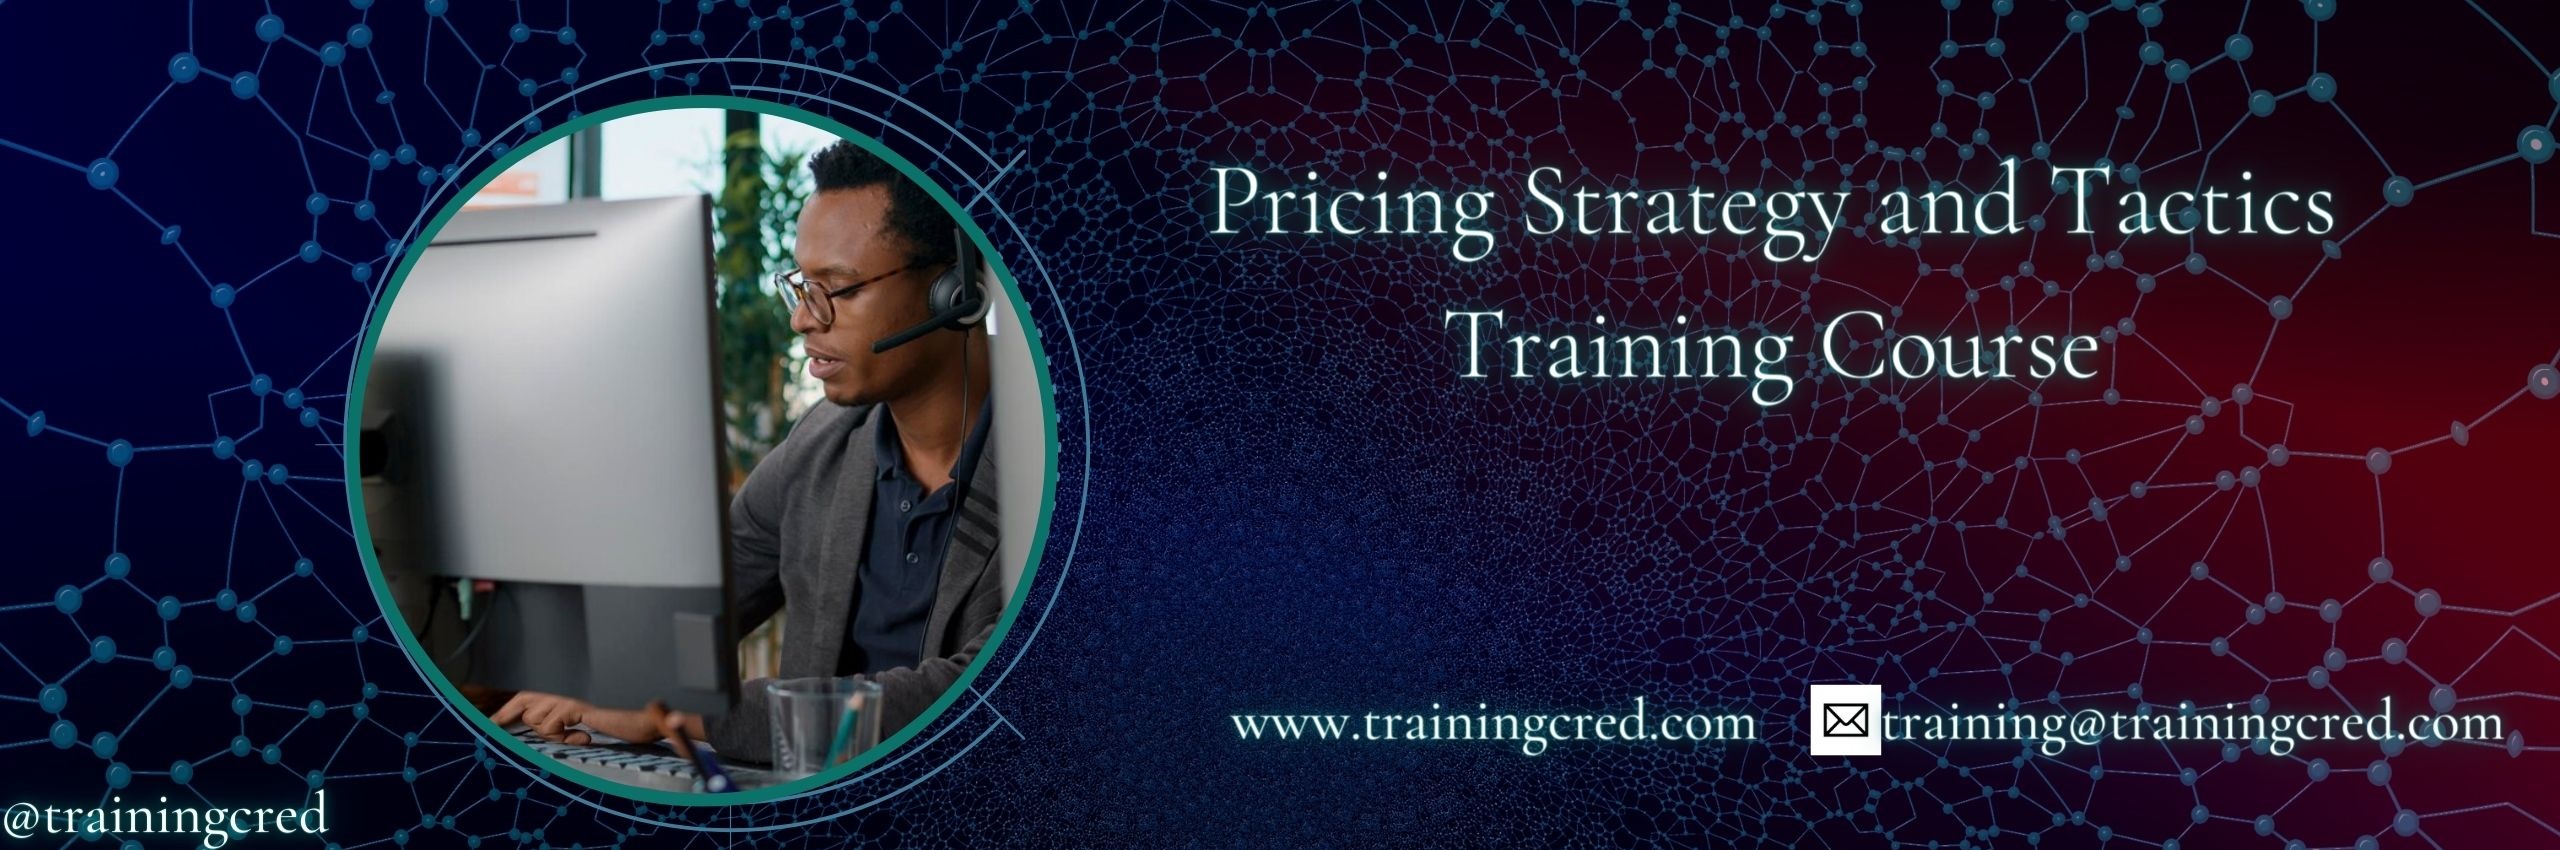 Pricing Strategy and Tactics Training